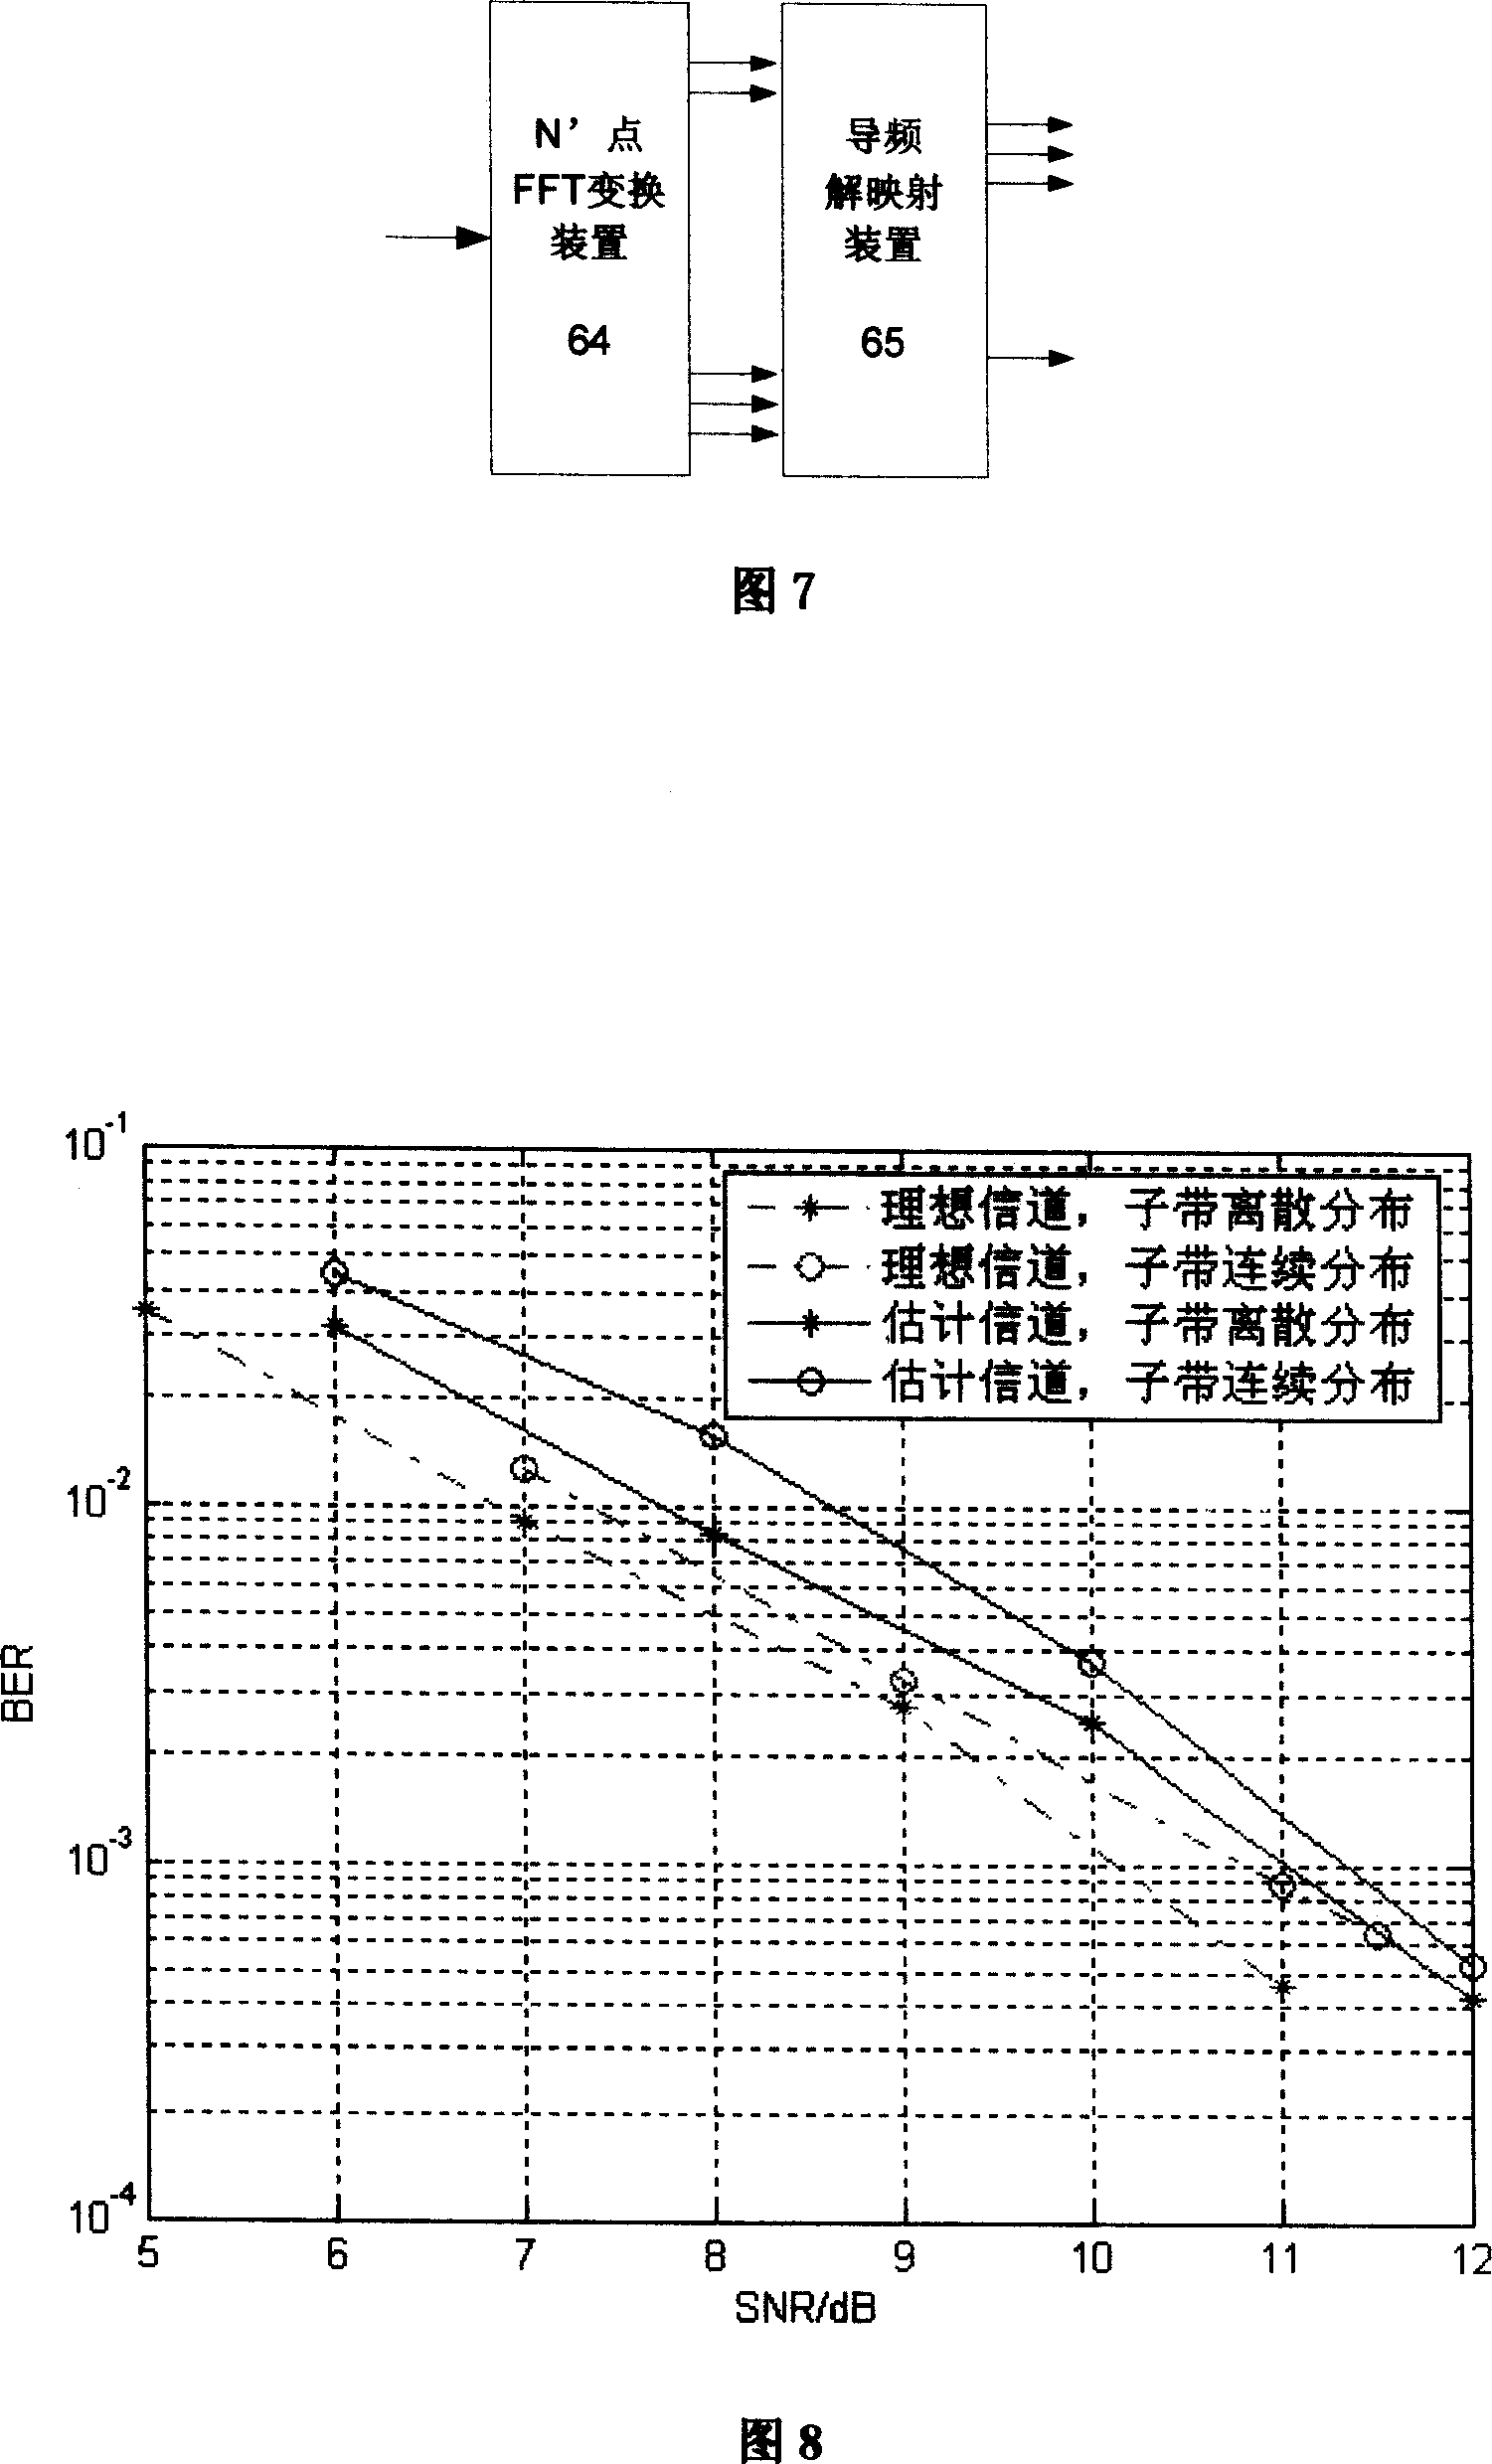 Channel estimation emitting-receiving device and method